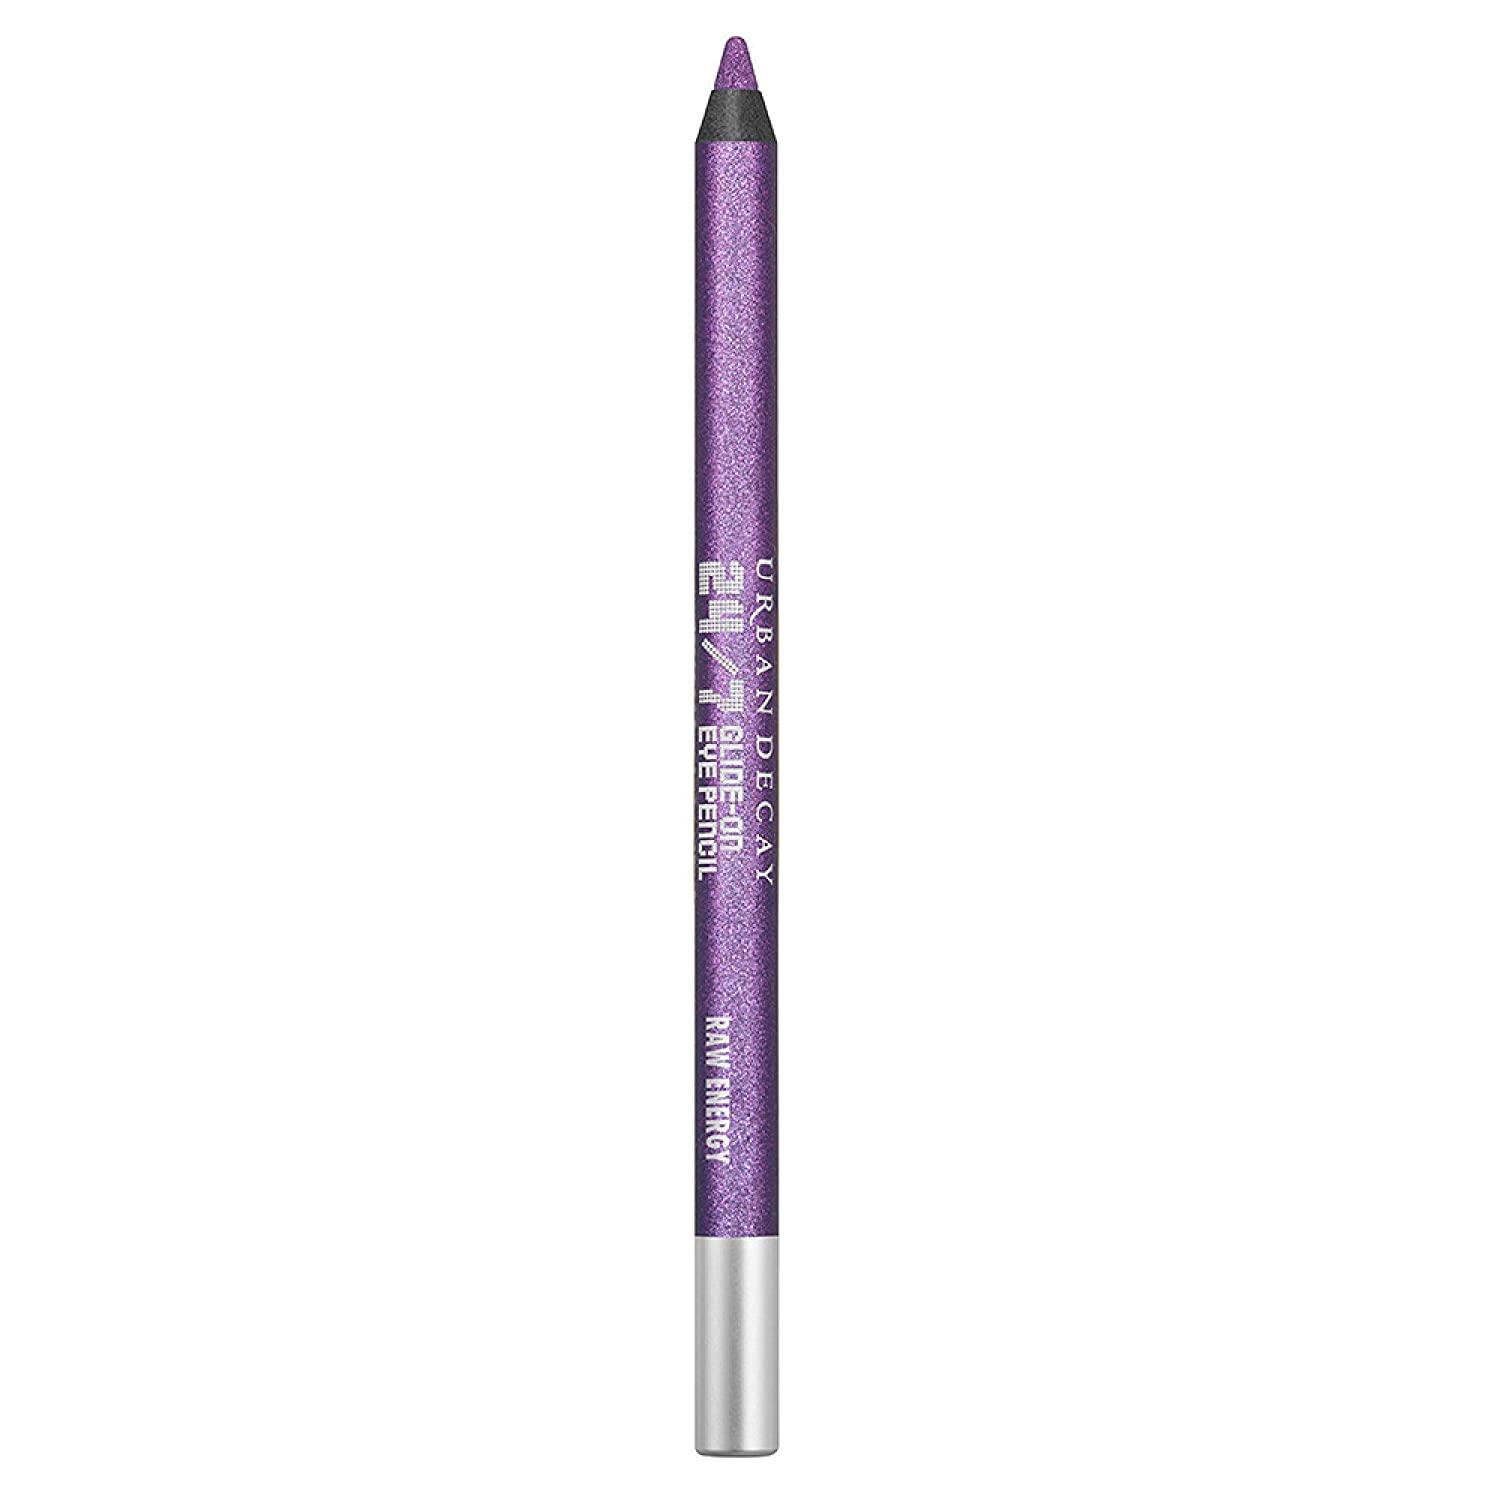 Urban Decay Stoned Vibes 24/7 Glide-On Eye Pencil Raw Energy